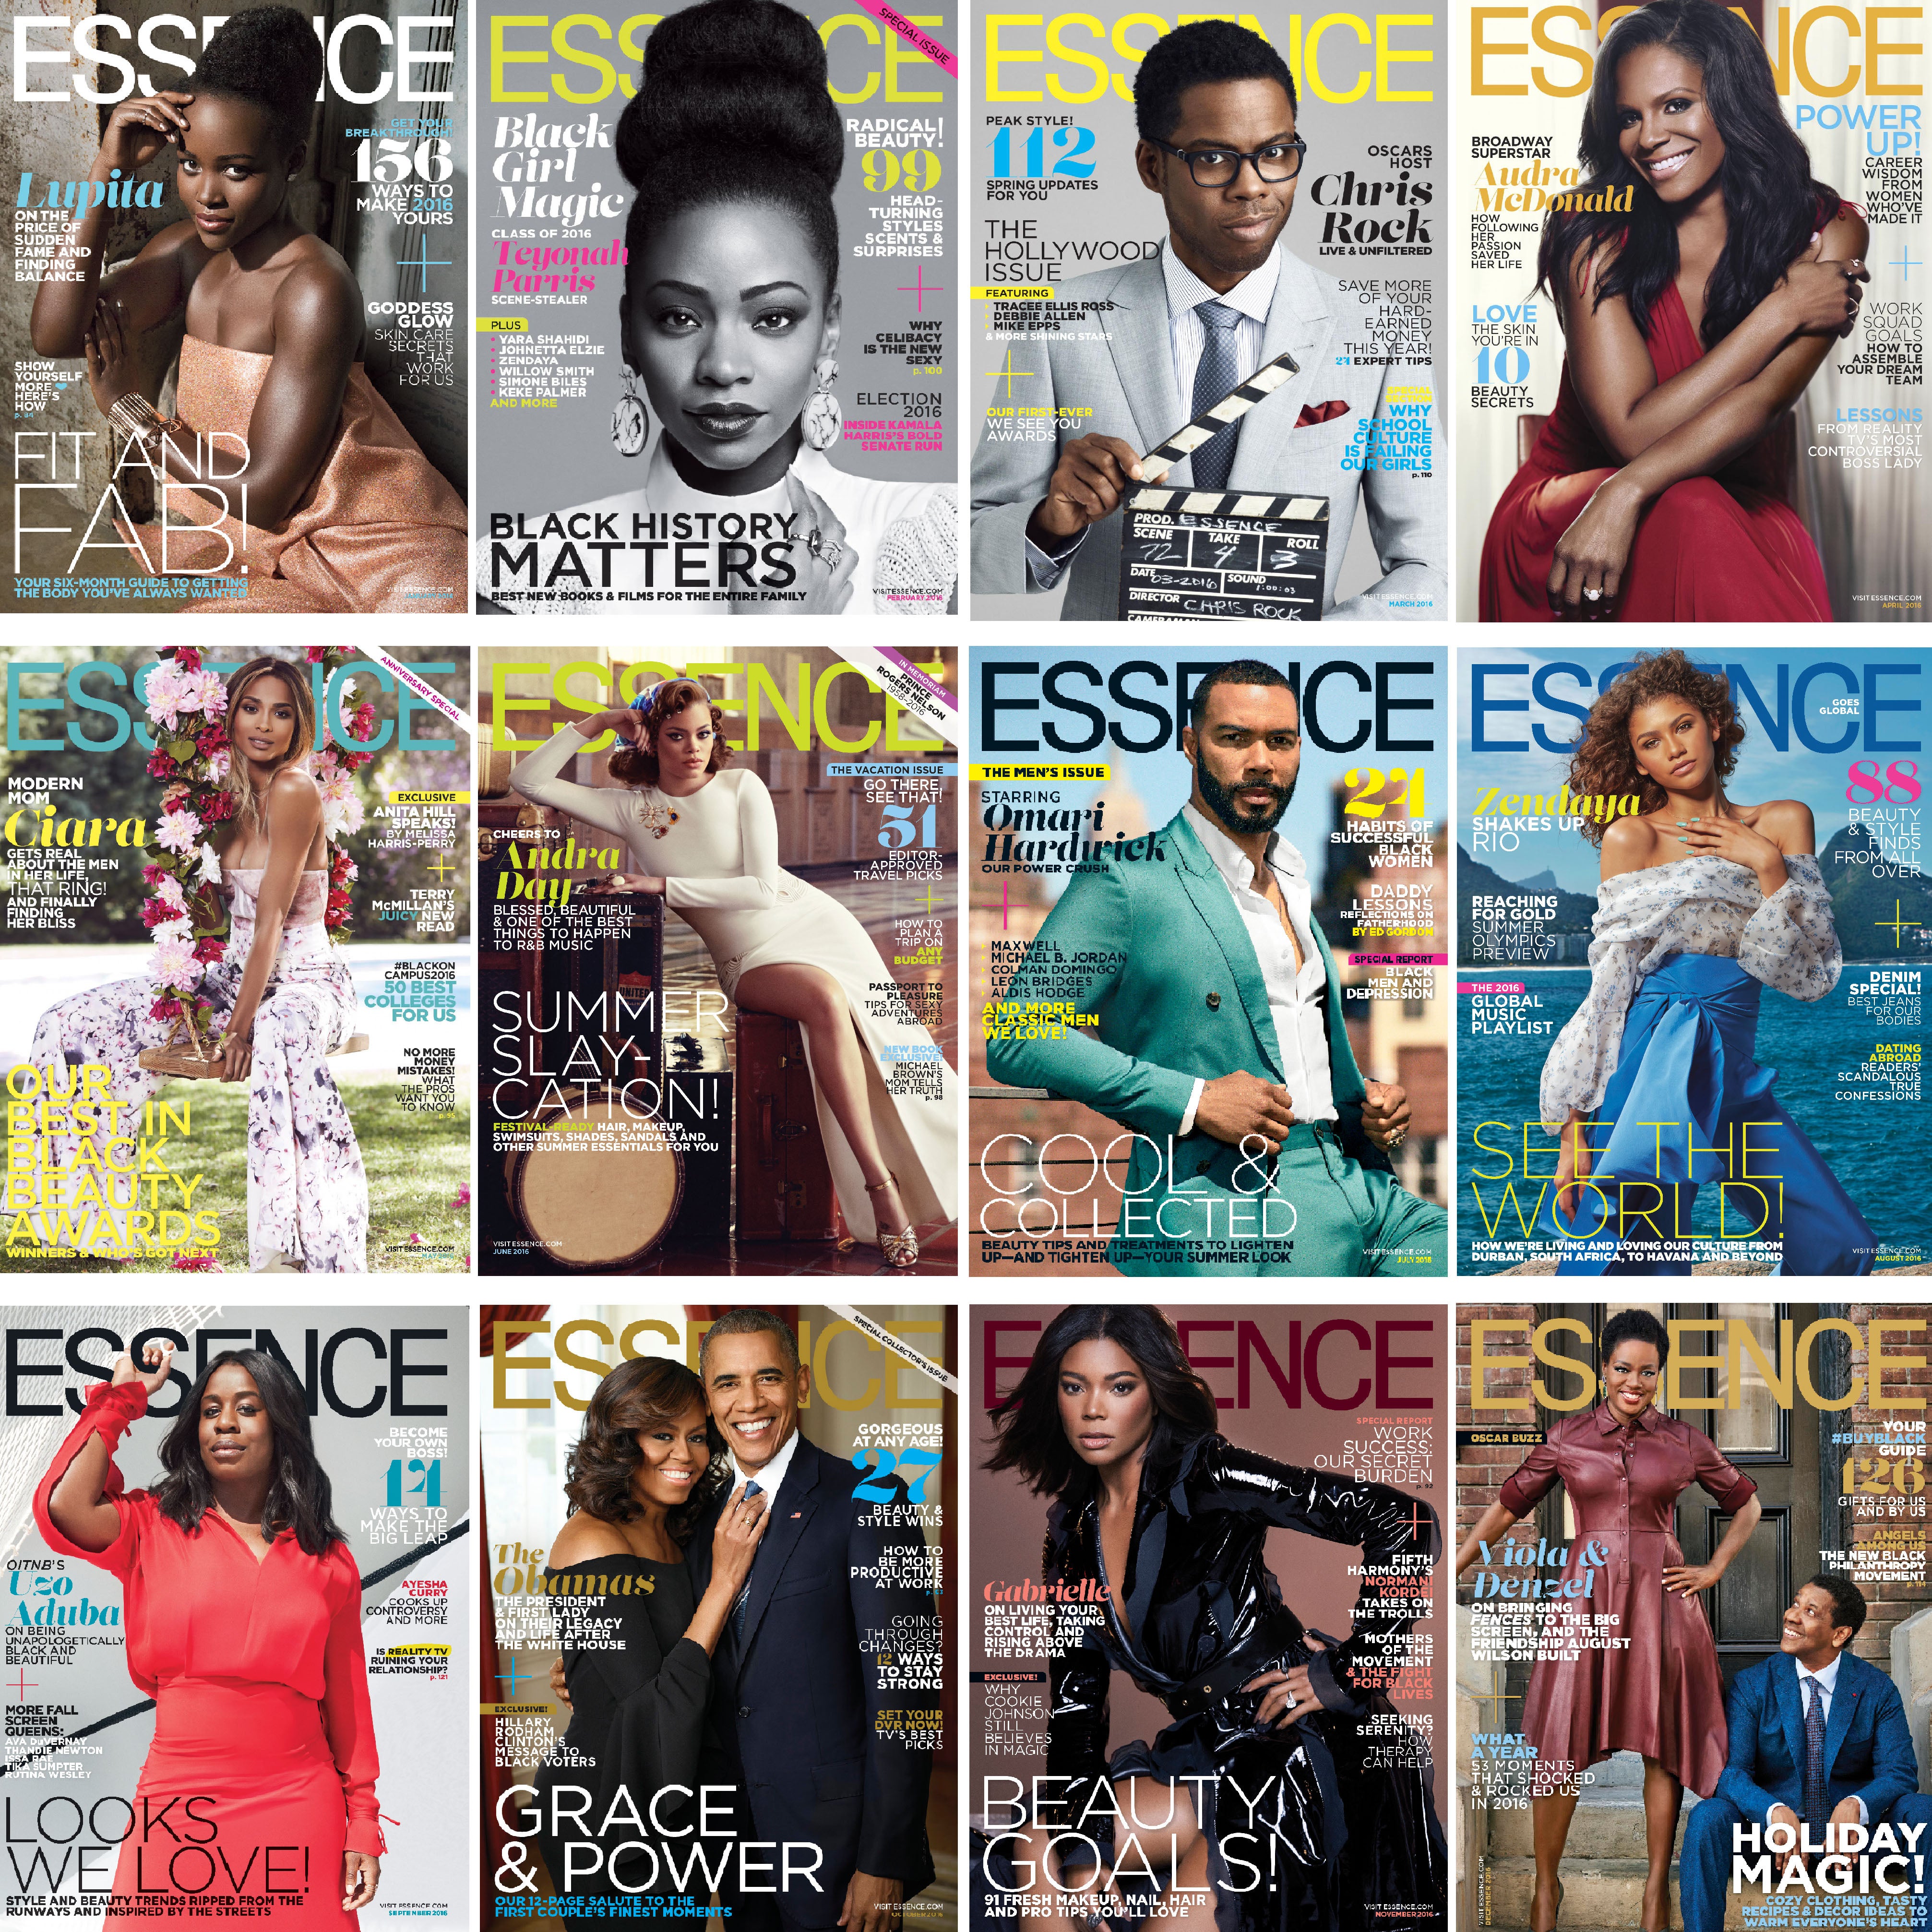 Black Excellence: A Year Of ESSENCE Covers In 2016
